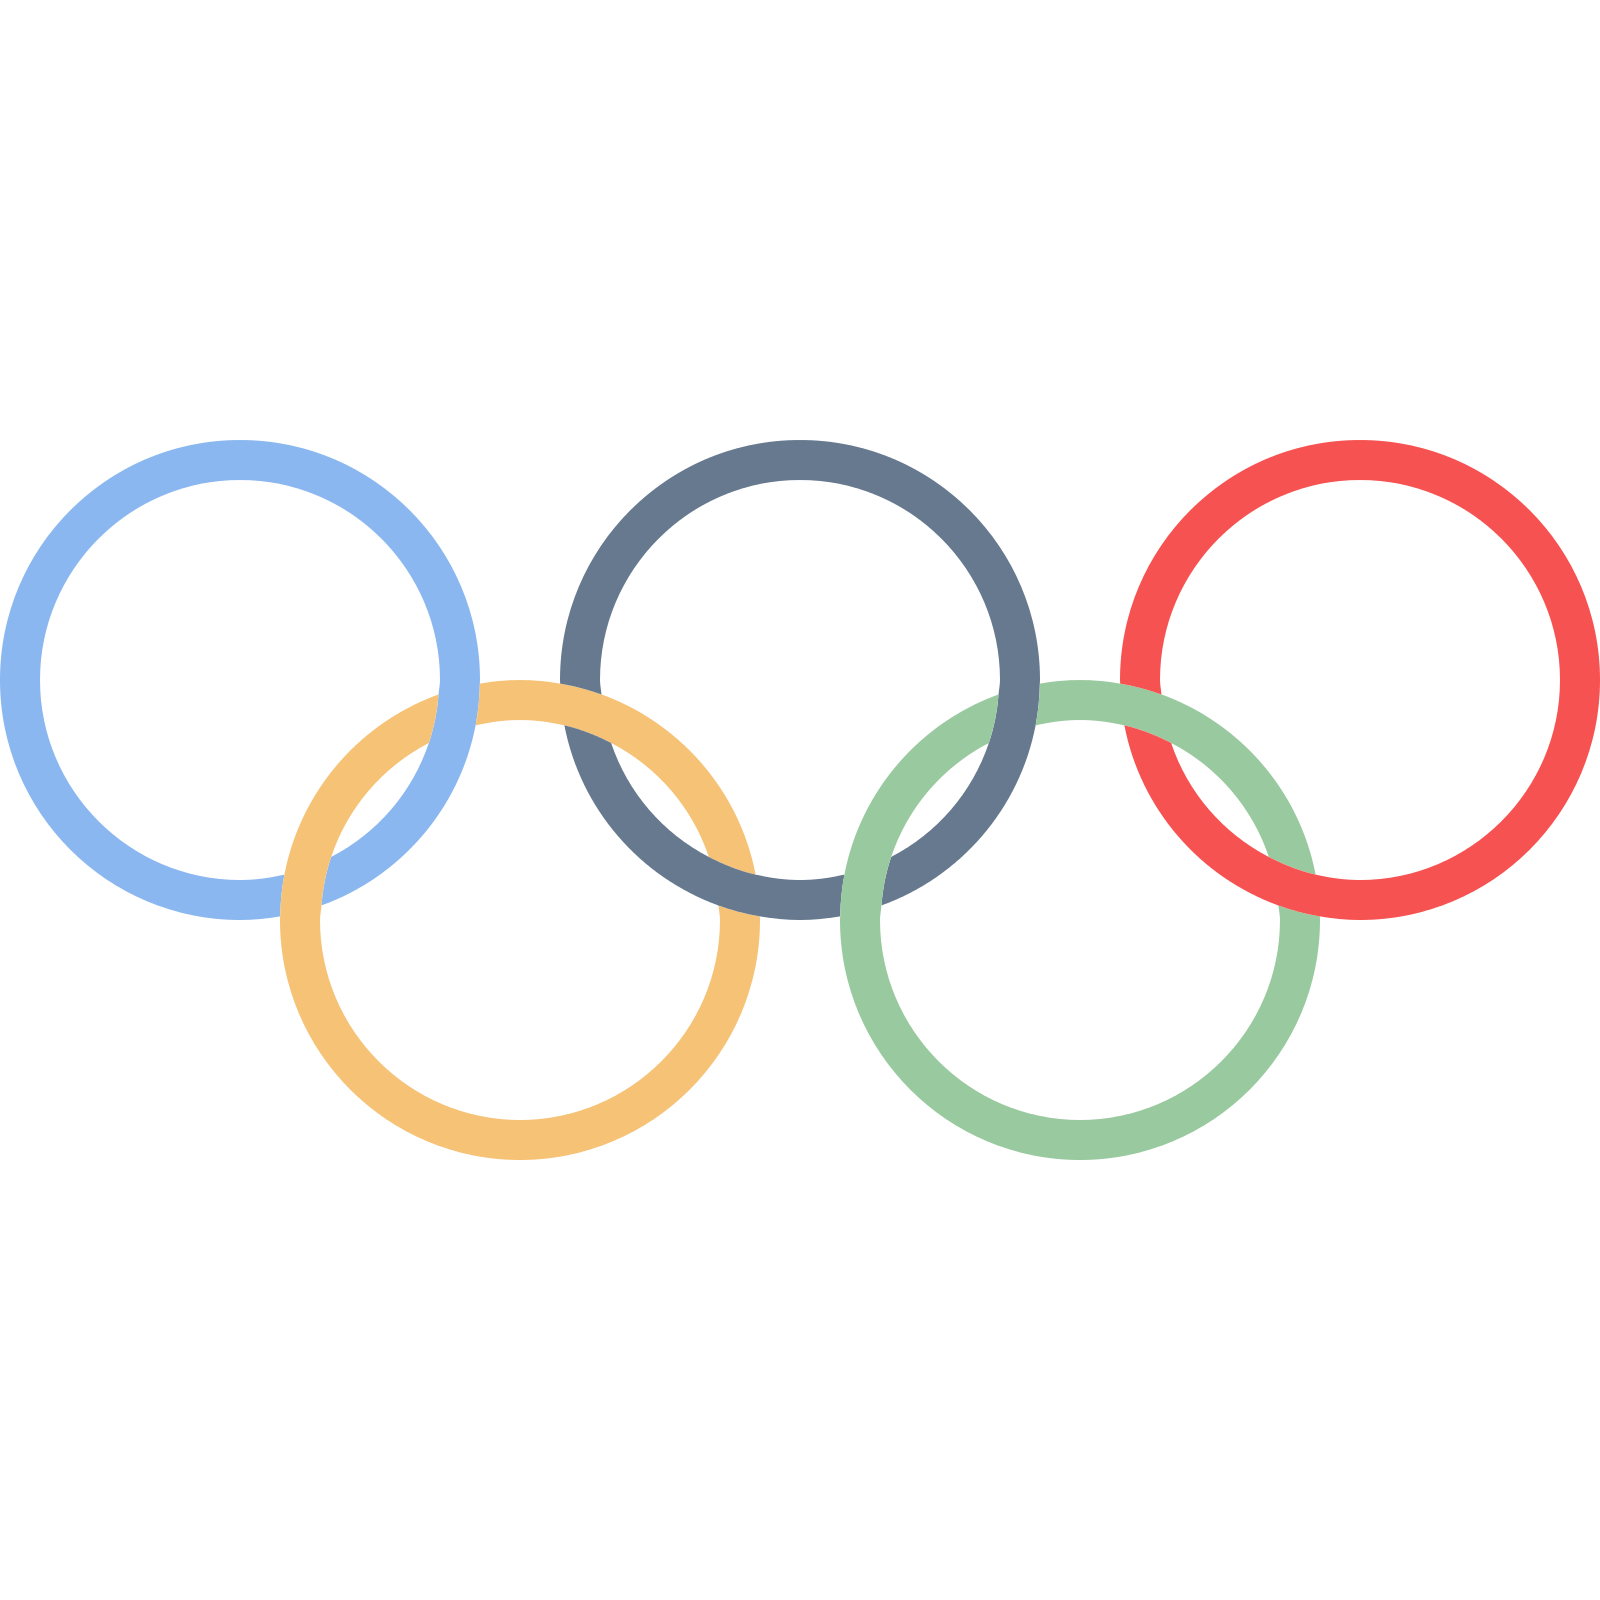 Olympic Rings PNG HD and HQ Image pngteam.com